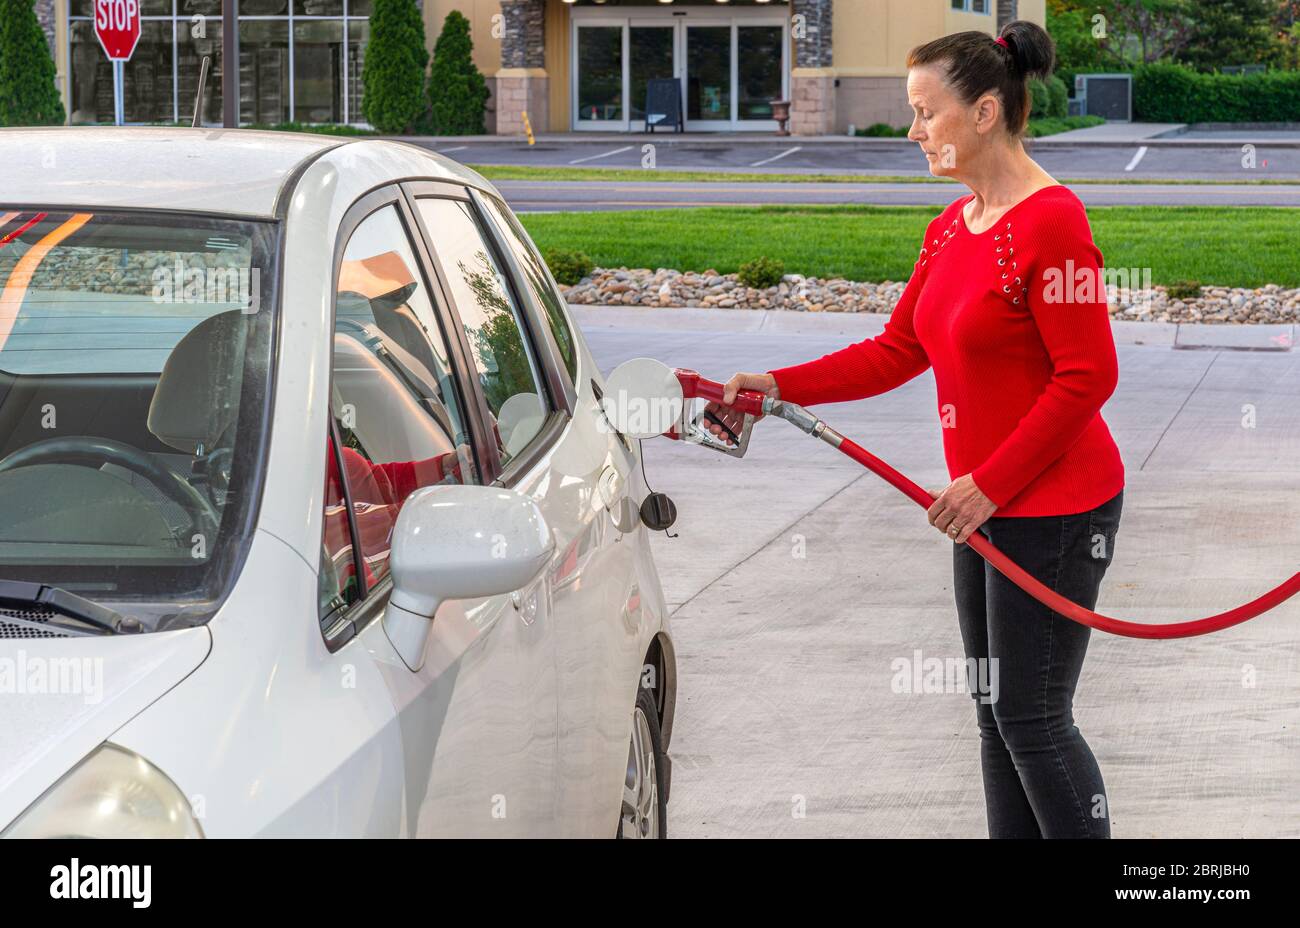 Horizontal shot of a middle-aged woman pumping gas into her white car. Stock Photo